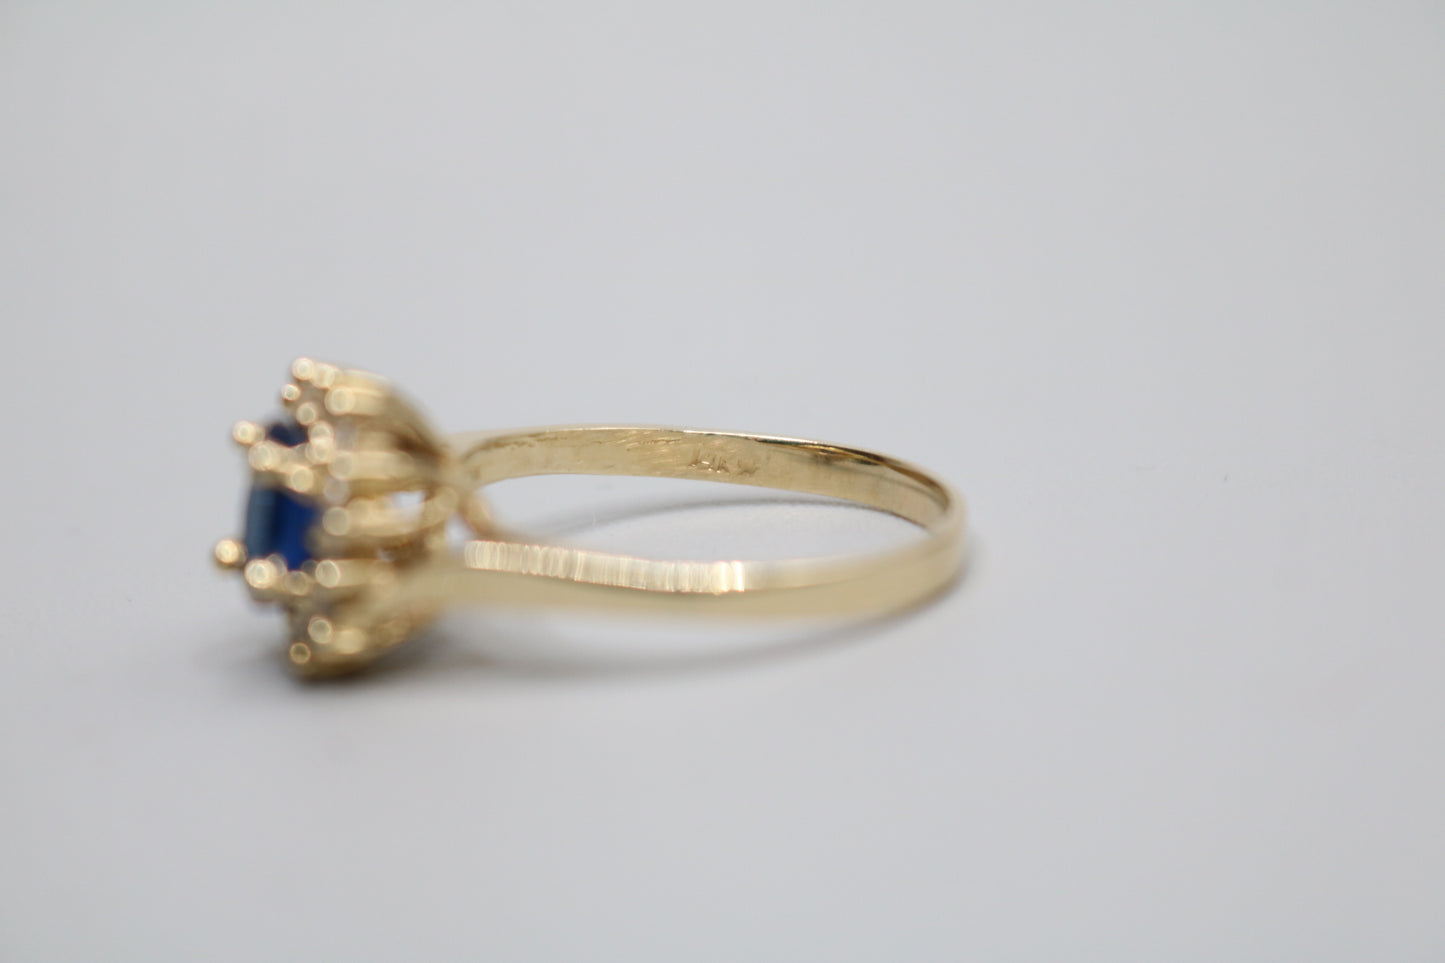 14K Yellow Gold Blue Spinel and Clear Stone Ring (Size 8 3/4)